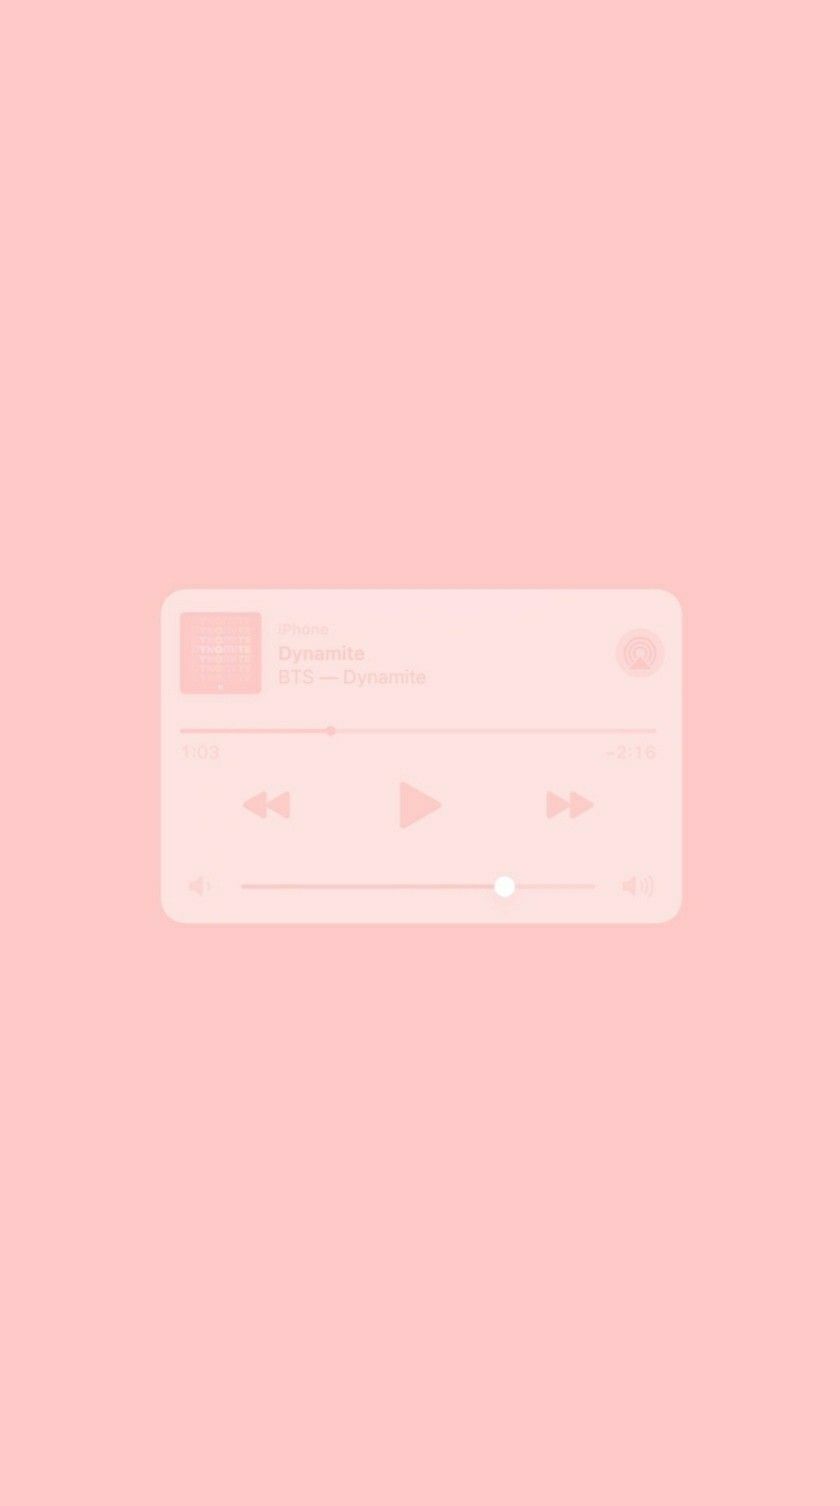 A pink background with music controls on it - Salmon